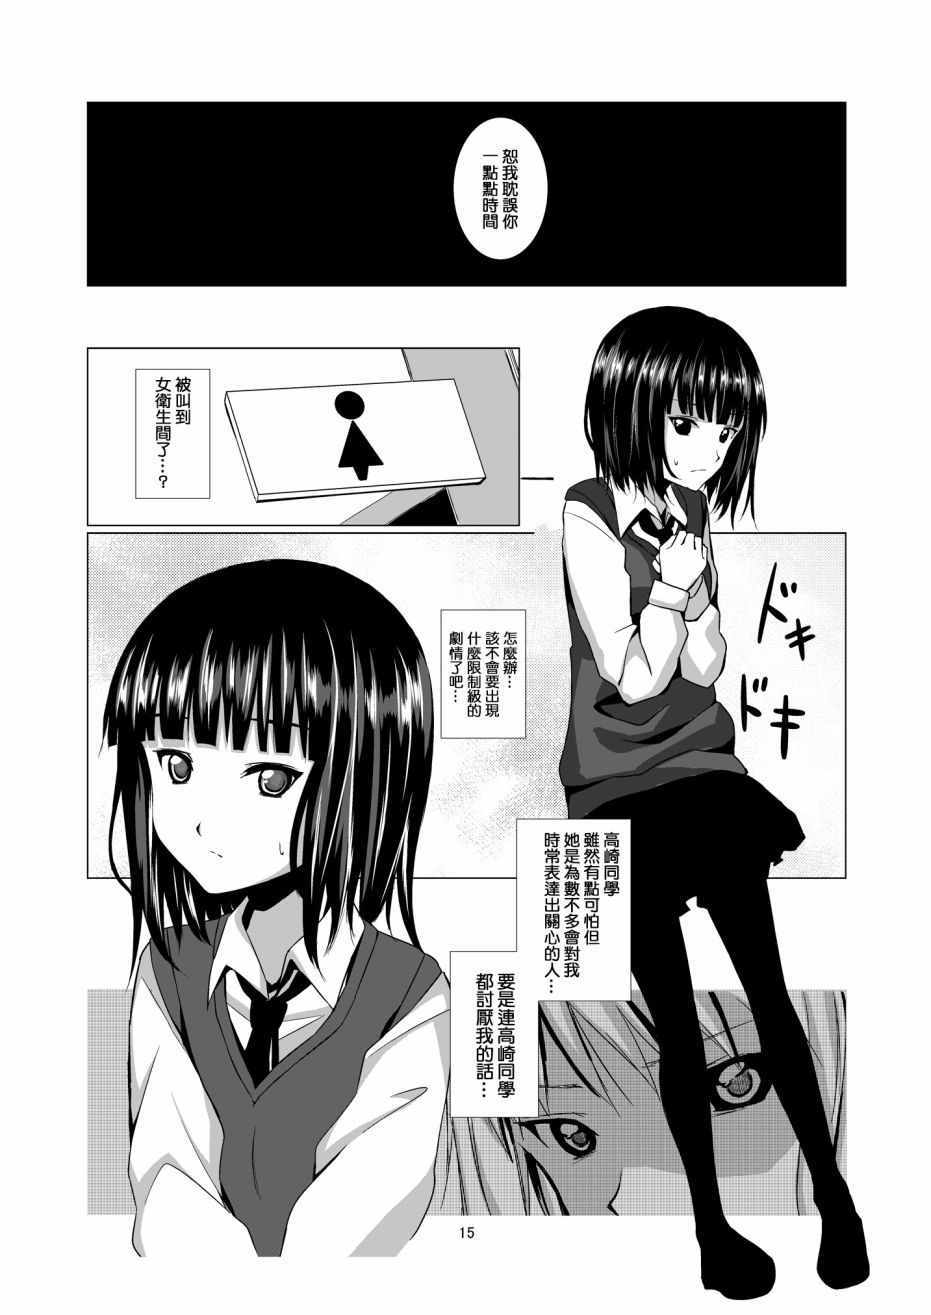 《Lover s Right》漫画 短篇